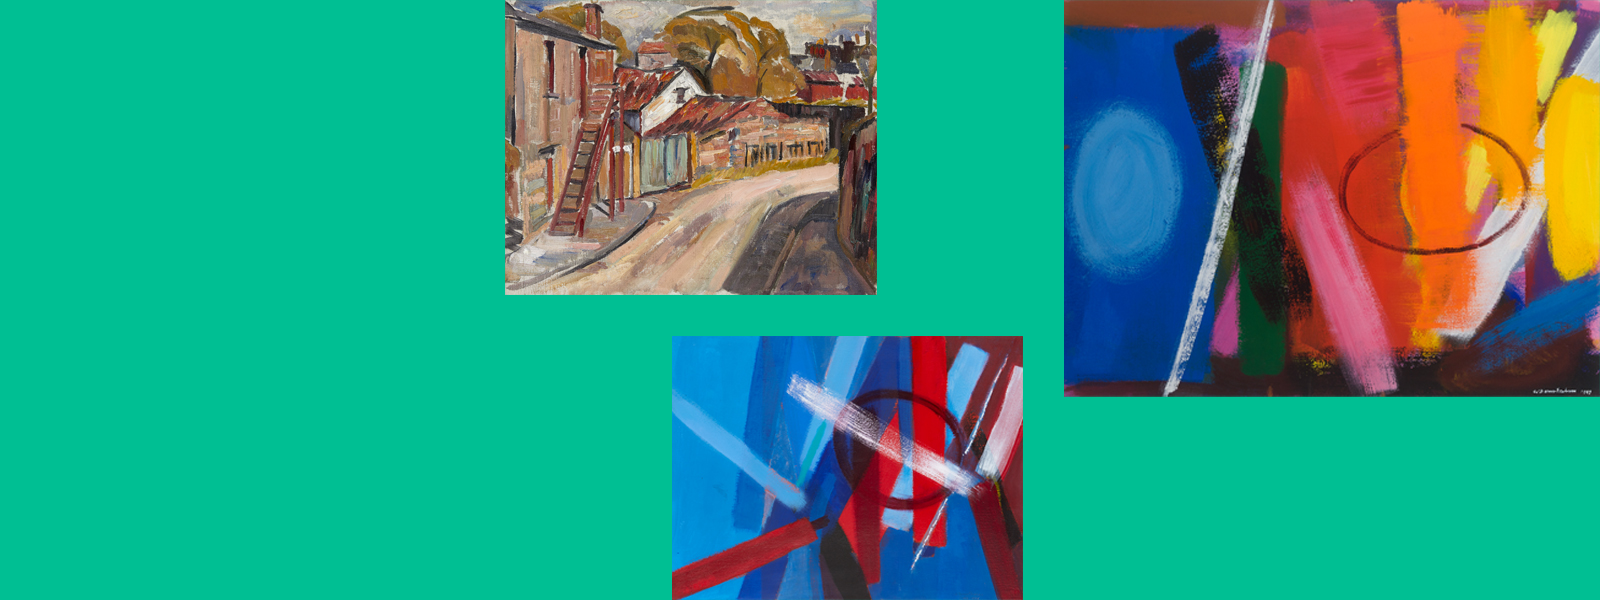 Three paintings grouped on an emerald background. From left to right: an oil painting of a bend in a road with buildings on both sides. The building in the foreground has an external staircase to upper level. An acrylic painting of an abstract composition of loose straight brushstrokes in many directions in blues and reds on a blue background. An acrylic painting with an abstract composition of vertical brushstrokes in bright colours on a brown background